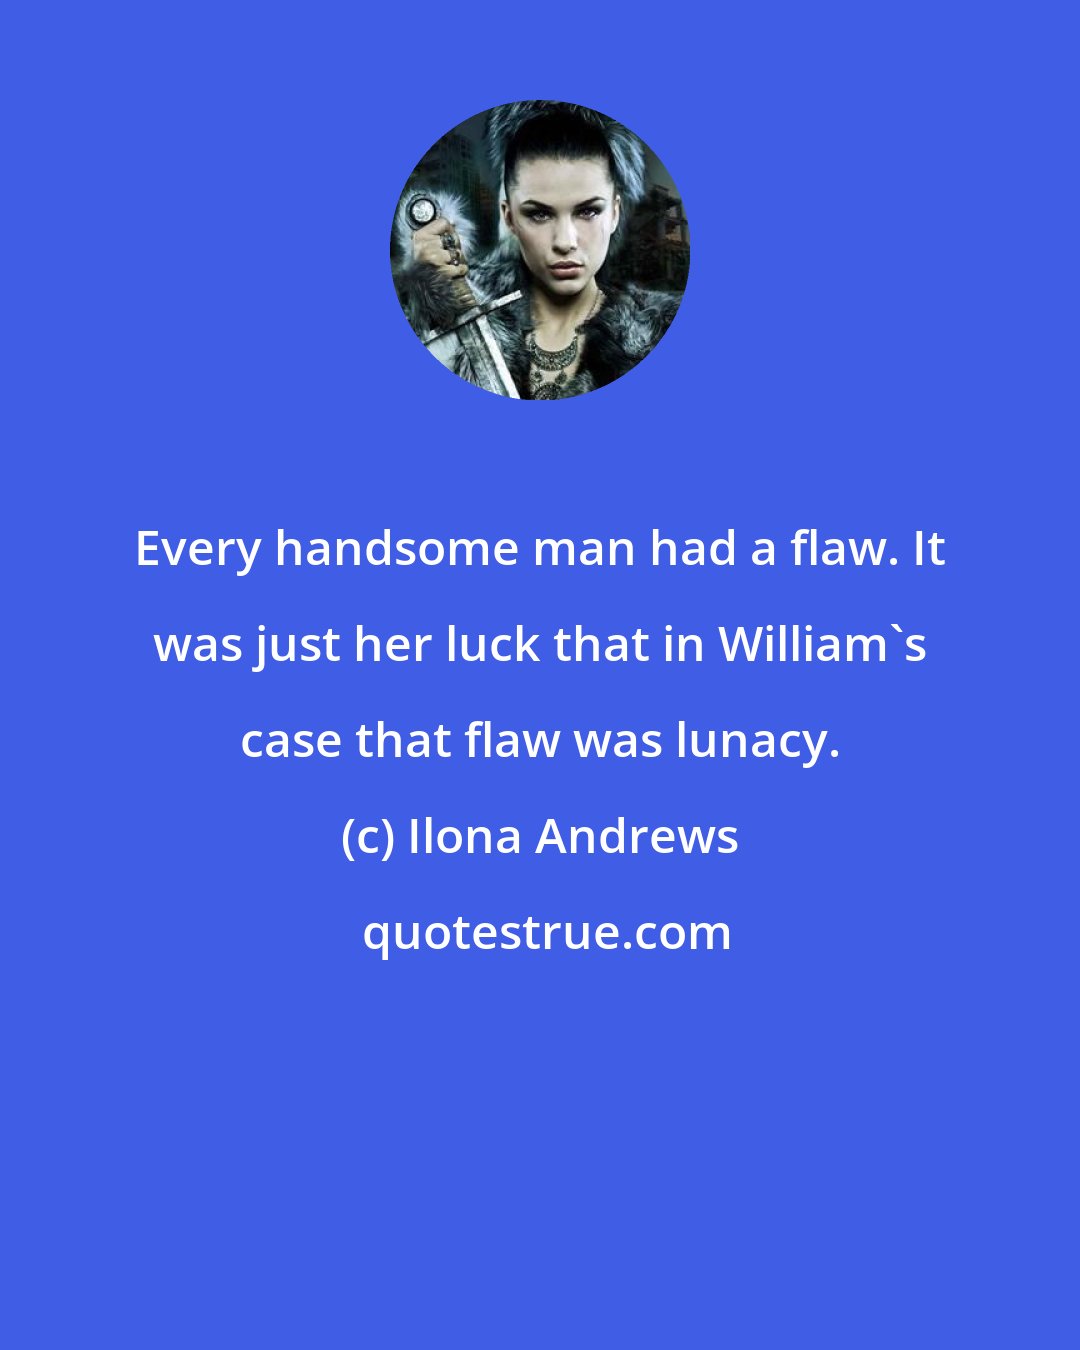 Ilona Andrews: Every handsome man had a flaw. It was just her luck that in William's case that flaw was lunacy.